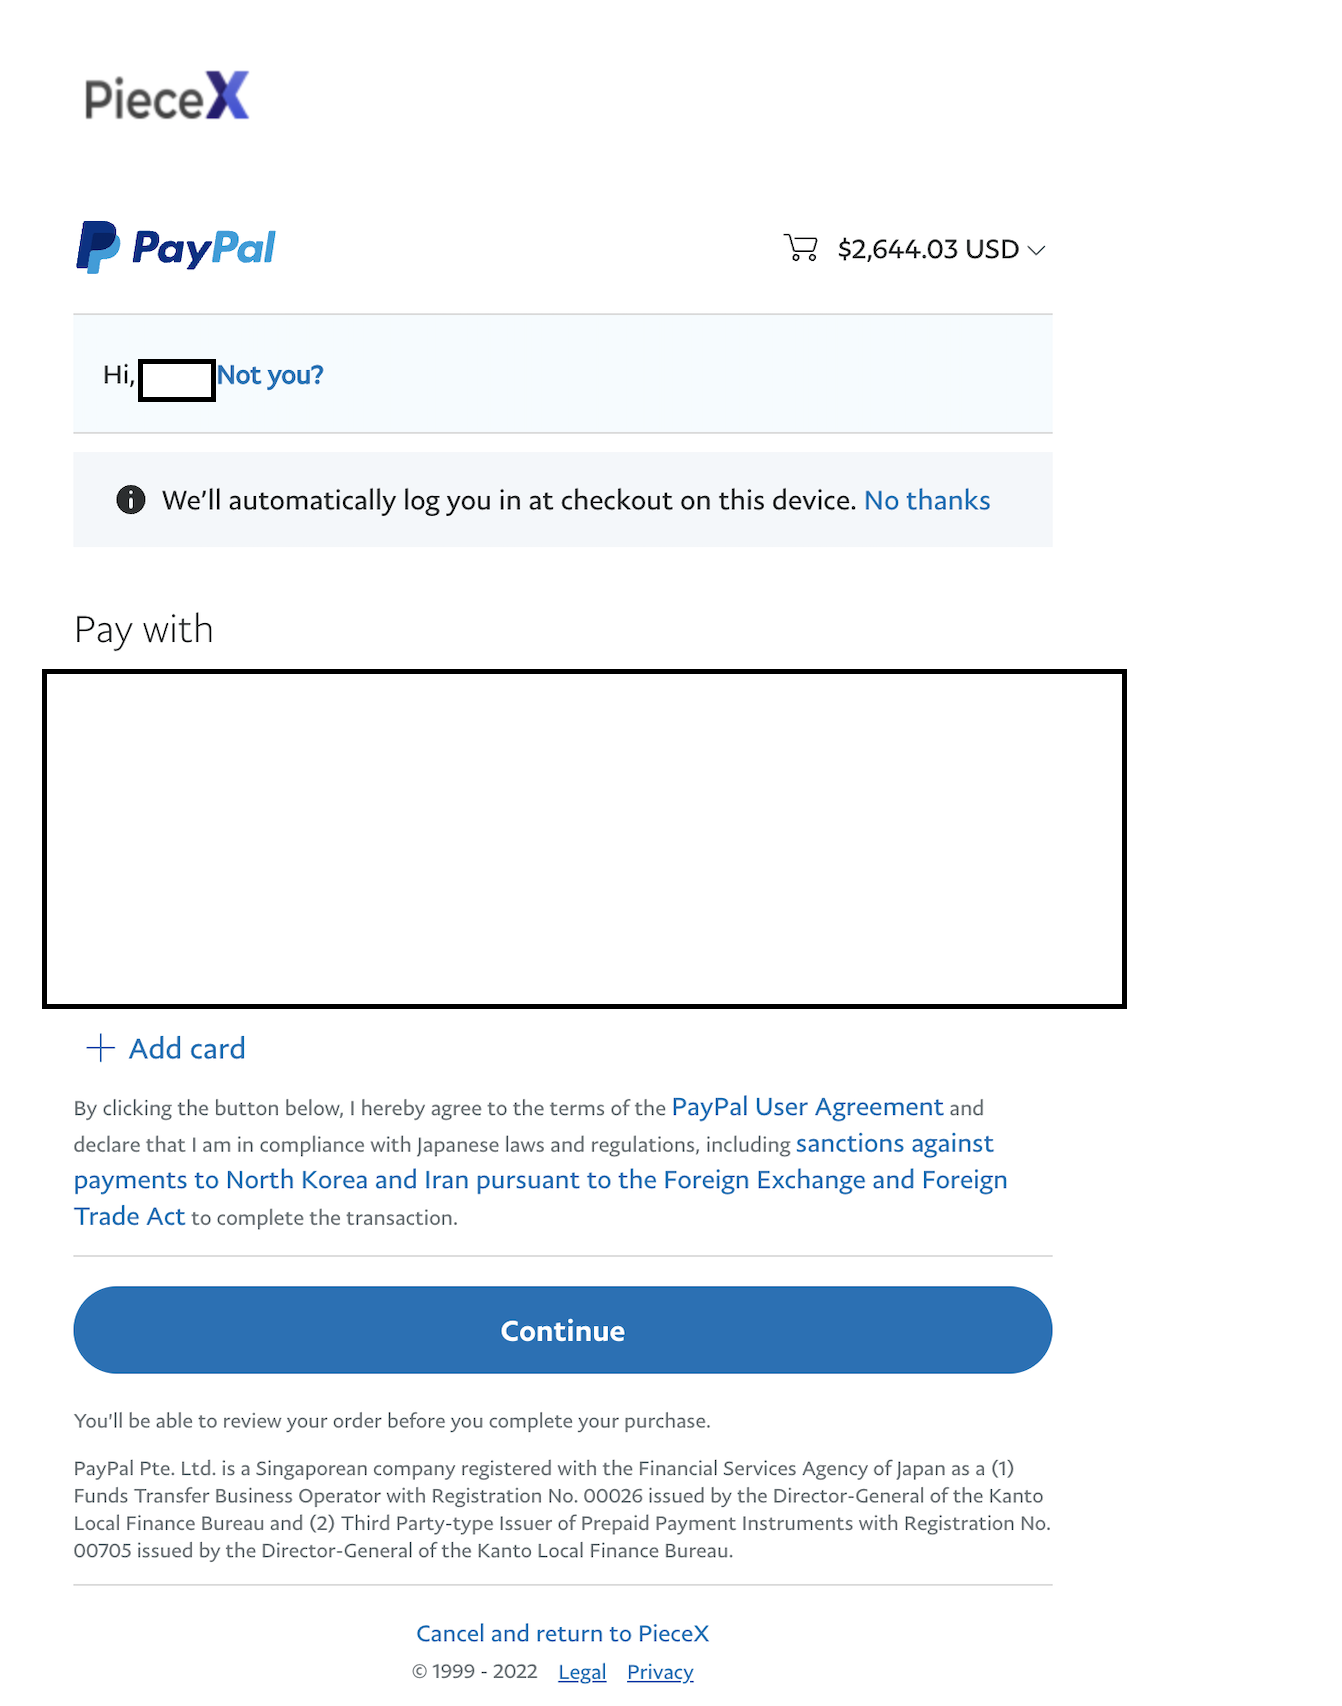 PayPal Payment - How to buy software source code on PieceX